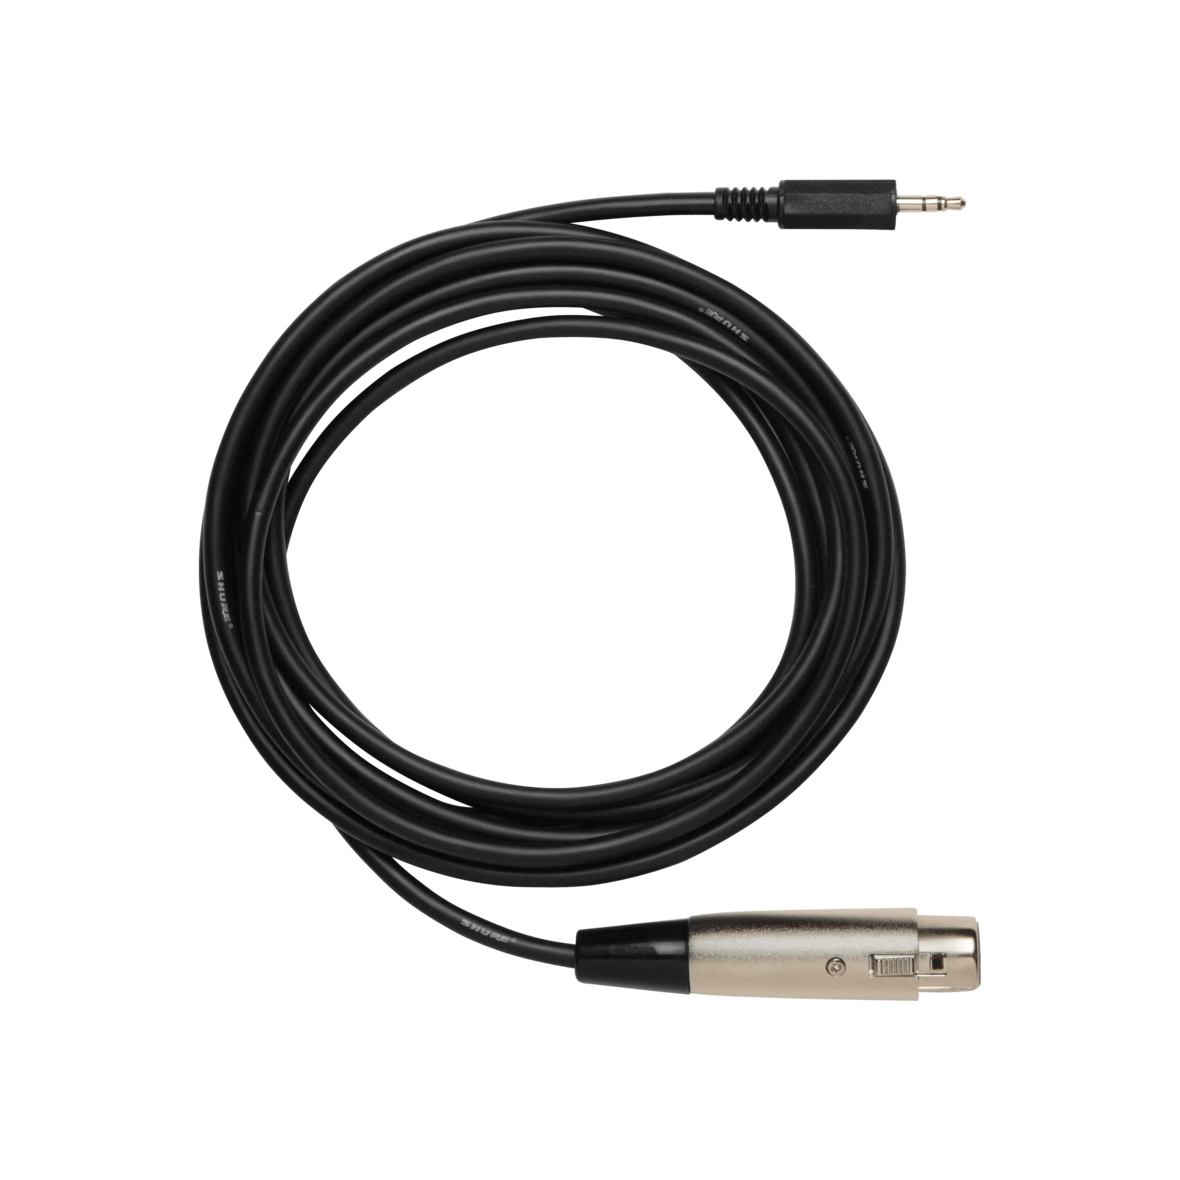 RP325 - Adapter Cable (XLR to 03. Mai mm Stereo) - Shure USA